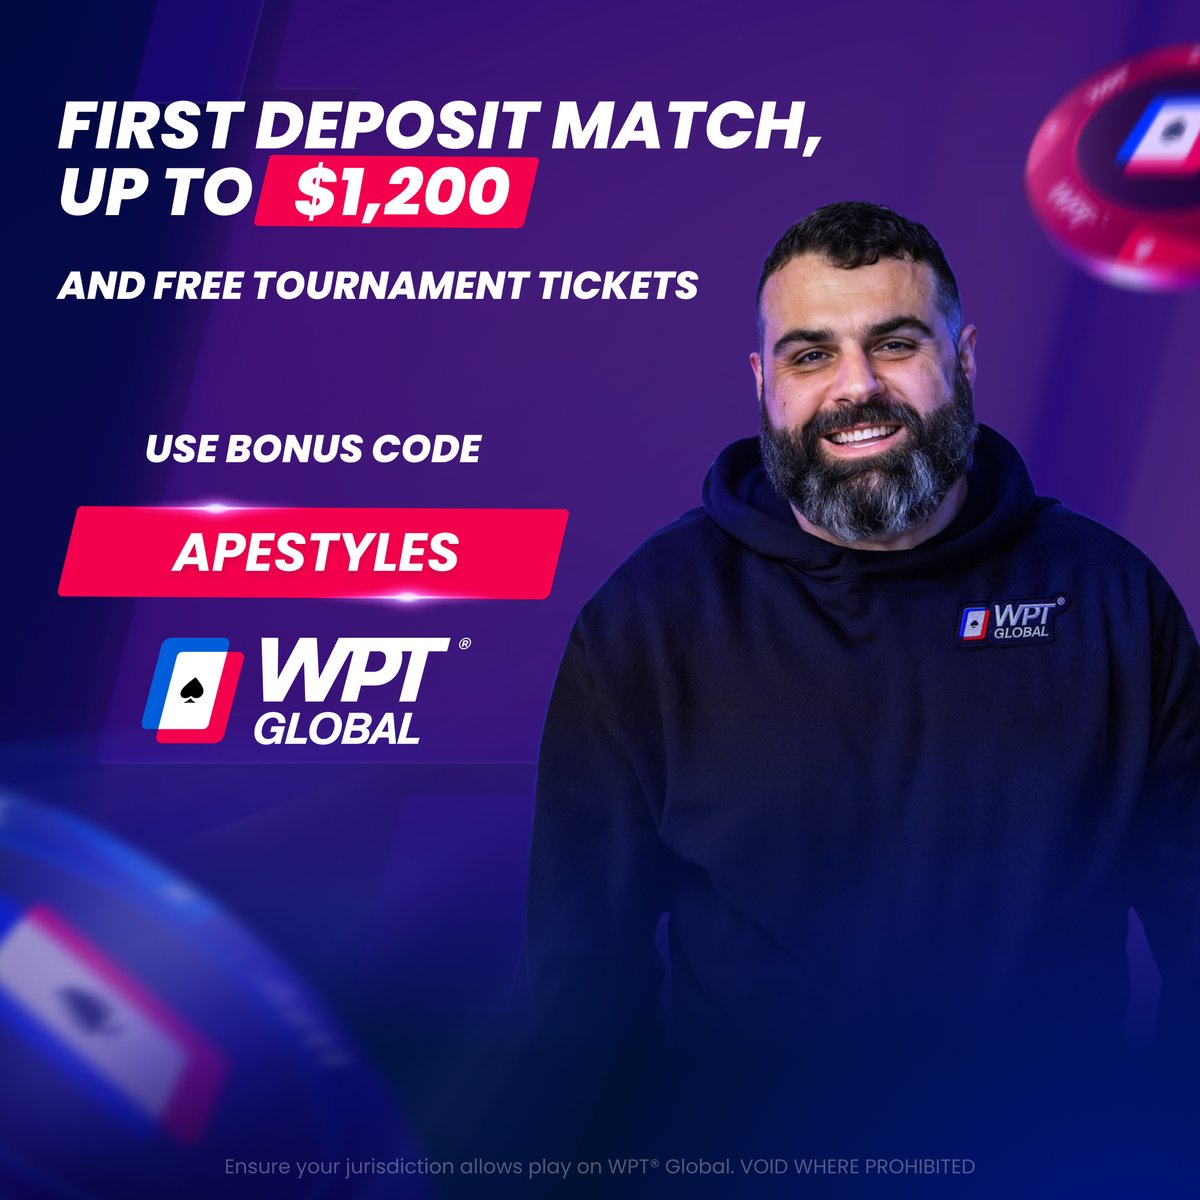 Use the 'apestyles' deposit code and get $50 free on deposits of $100 or more. No rake on tournaments this month and the softest public cash games on the net @wpt_global Instructions on how to sign up are pinned on my insta. instagram.com/apestyles1/?hl…